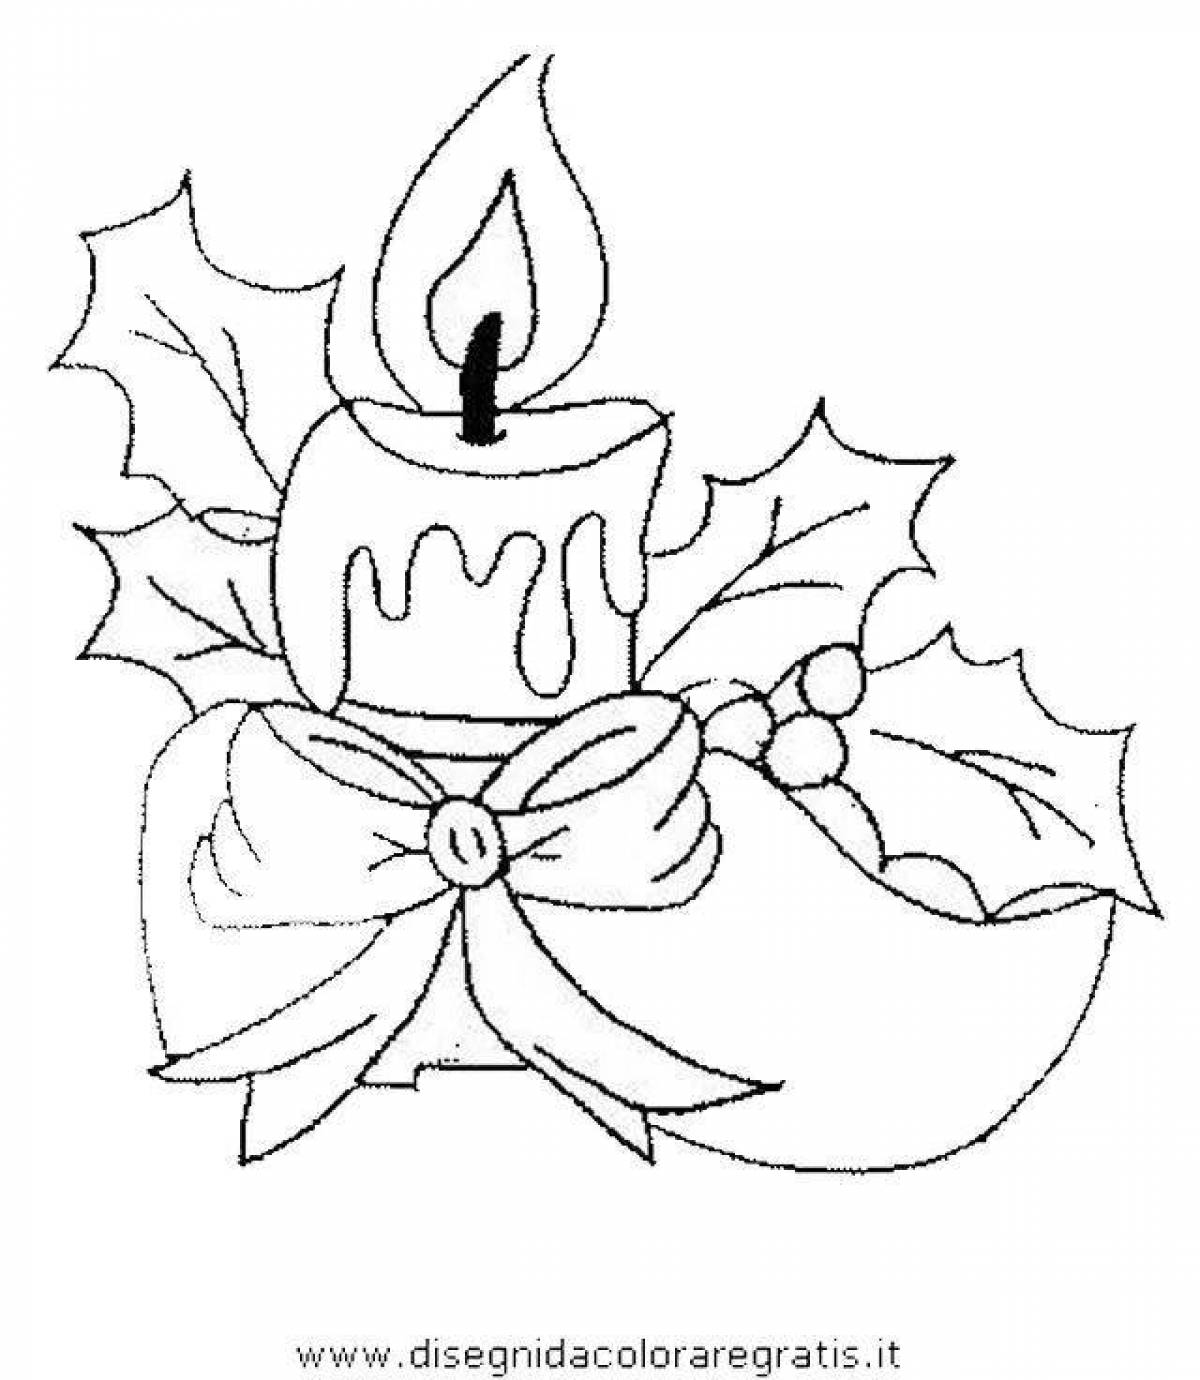 Glowing Christmas candle coloring page